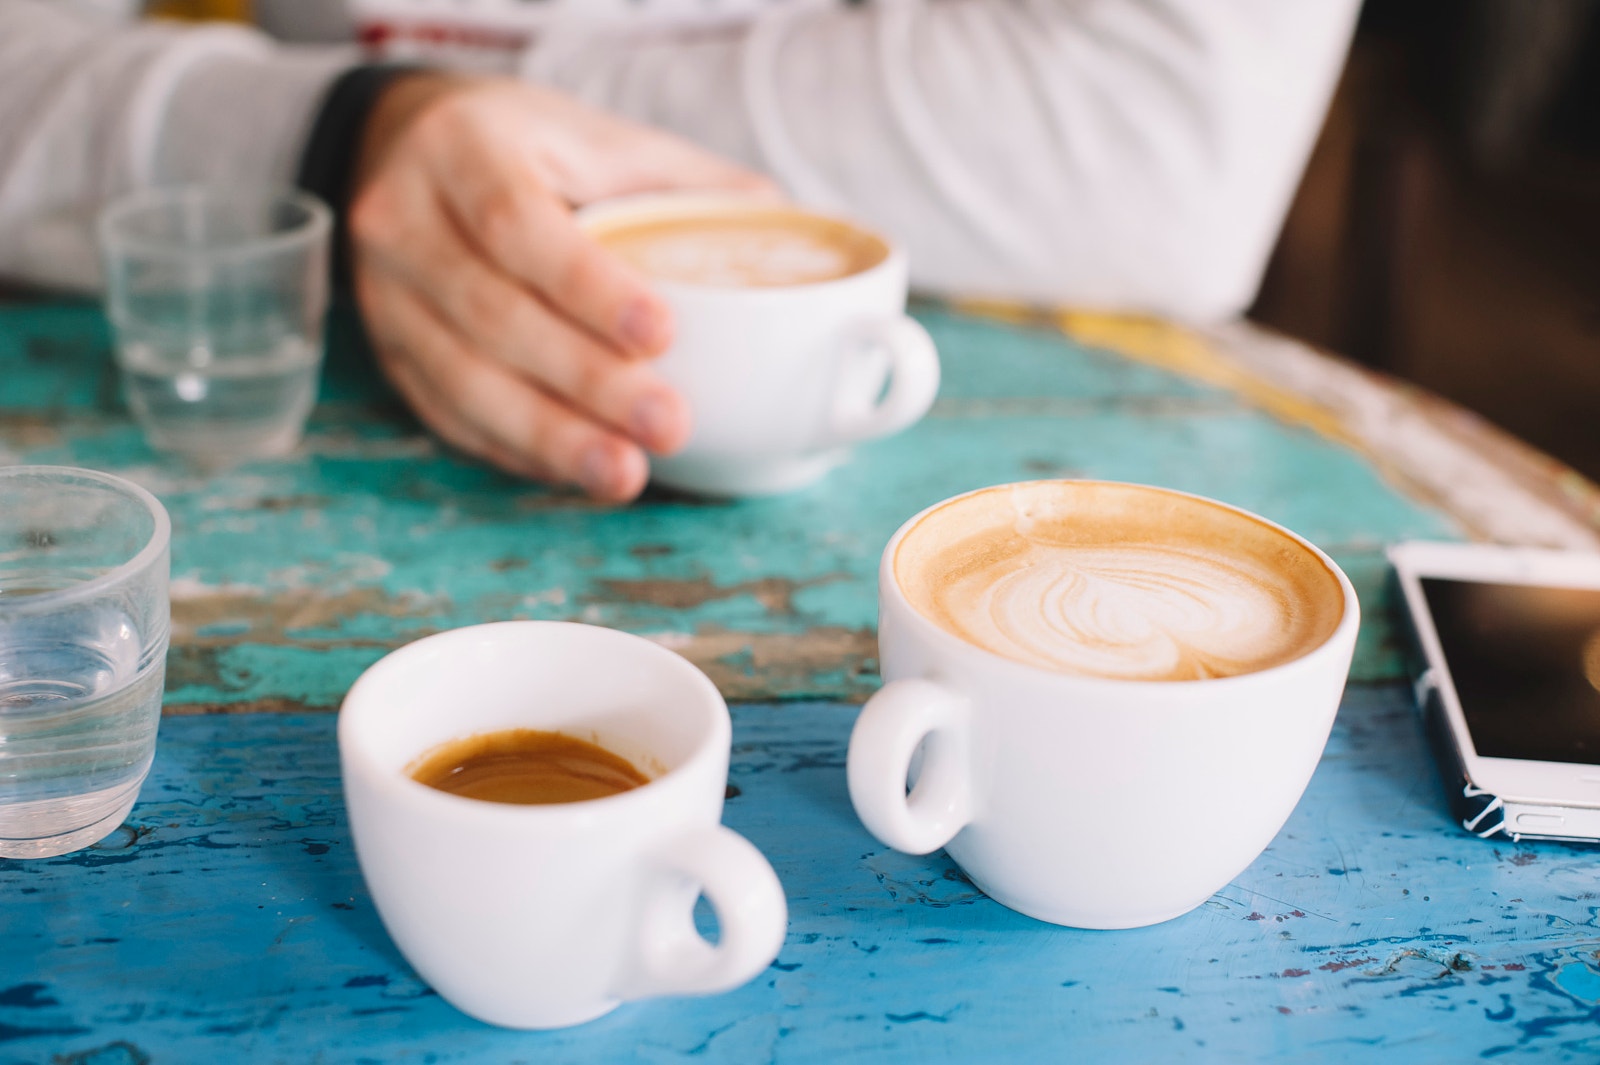  coffee talk understanding visual preferences your customers 